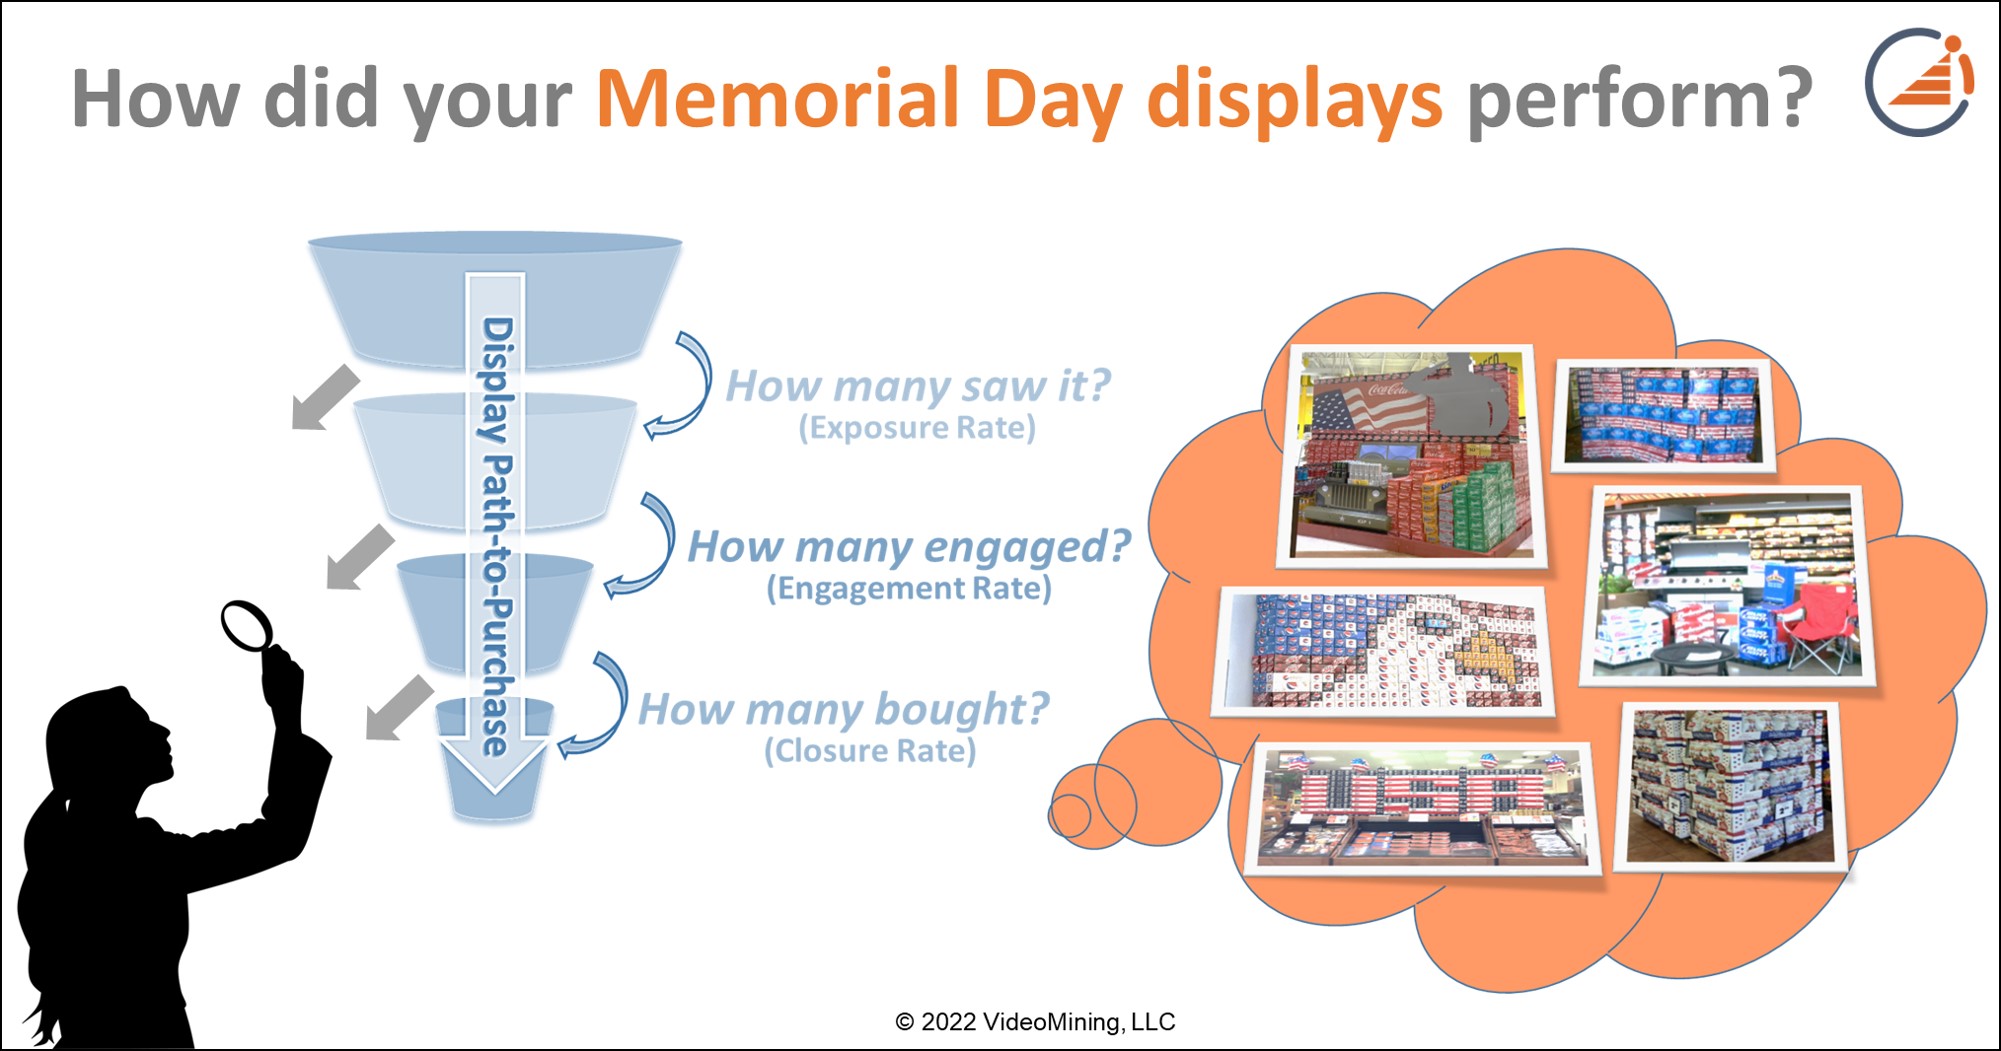 How did your Memorial Day displays perform?